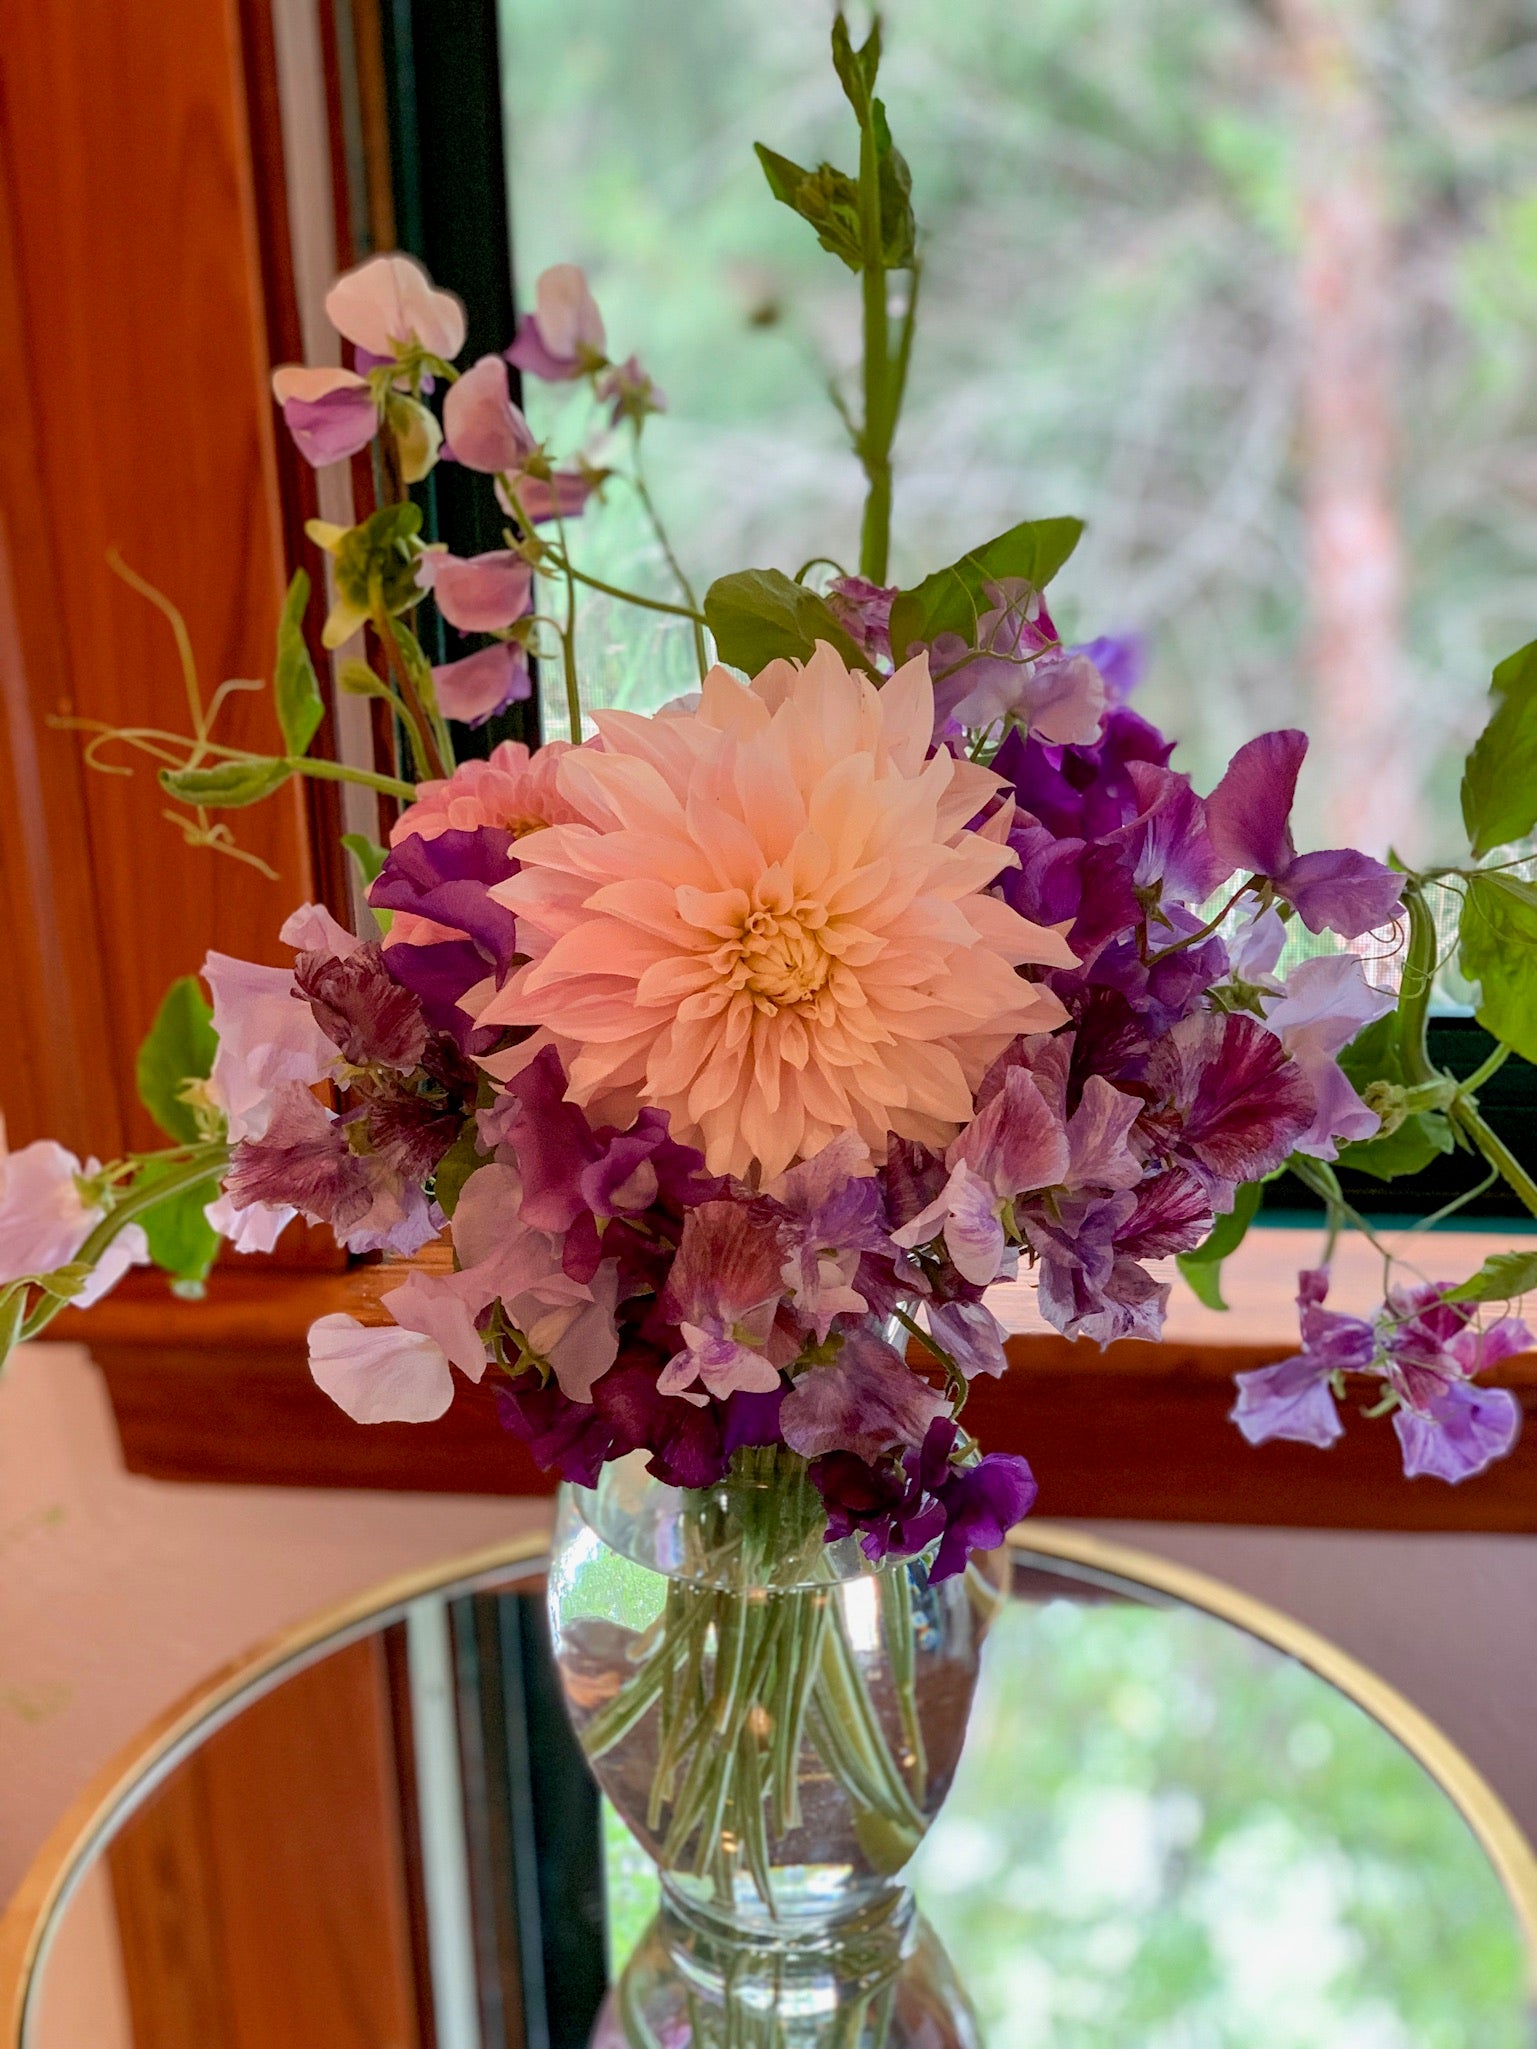 Davis Designs has the most gorgeous summer flower arrangements to impress guests and beautify your home without making any major design changes. Get inspired!